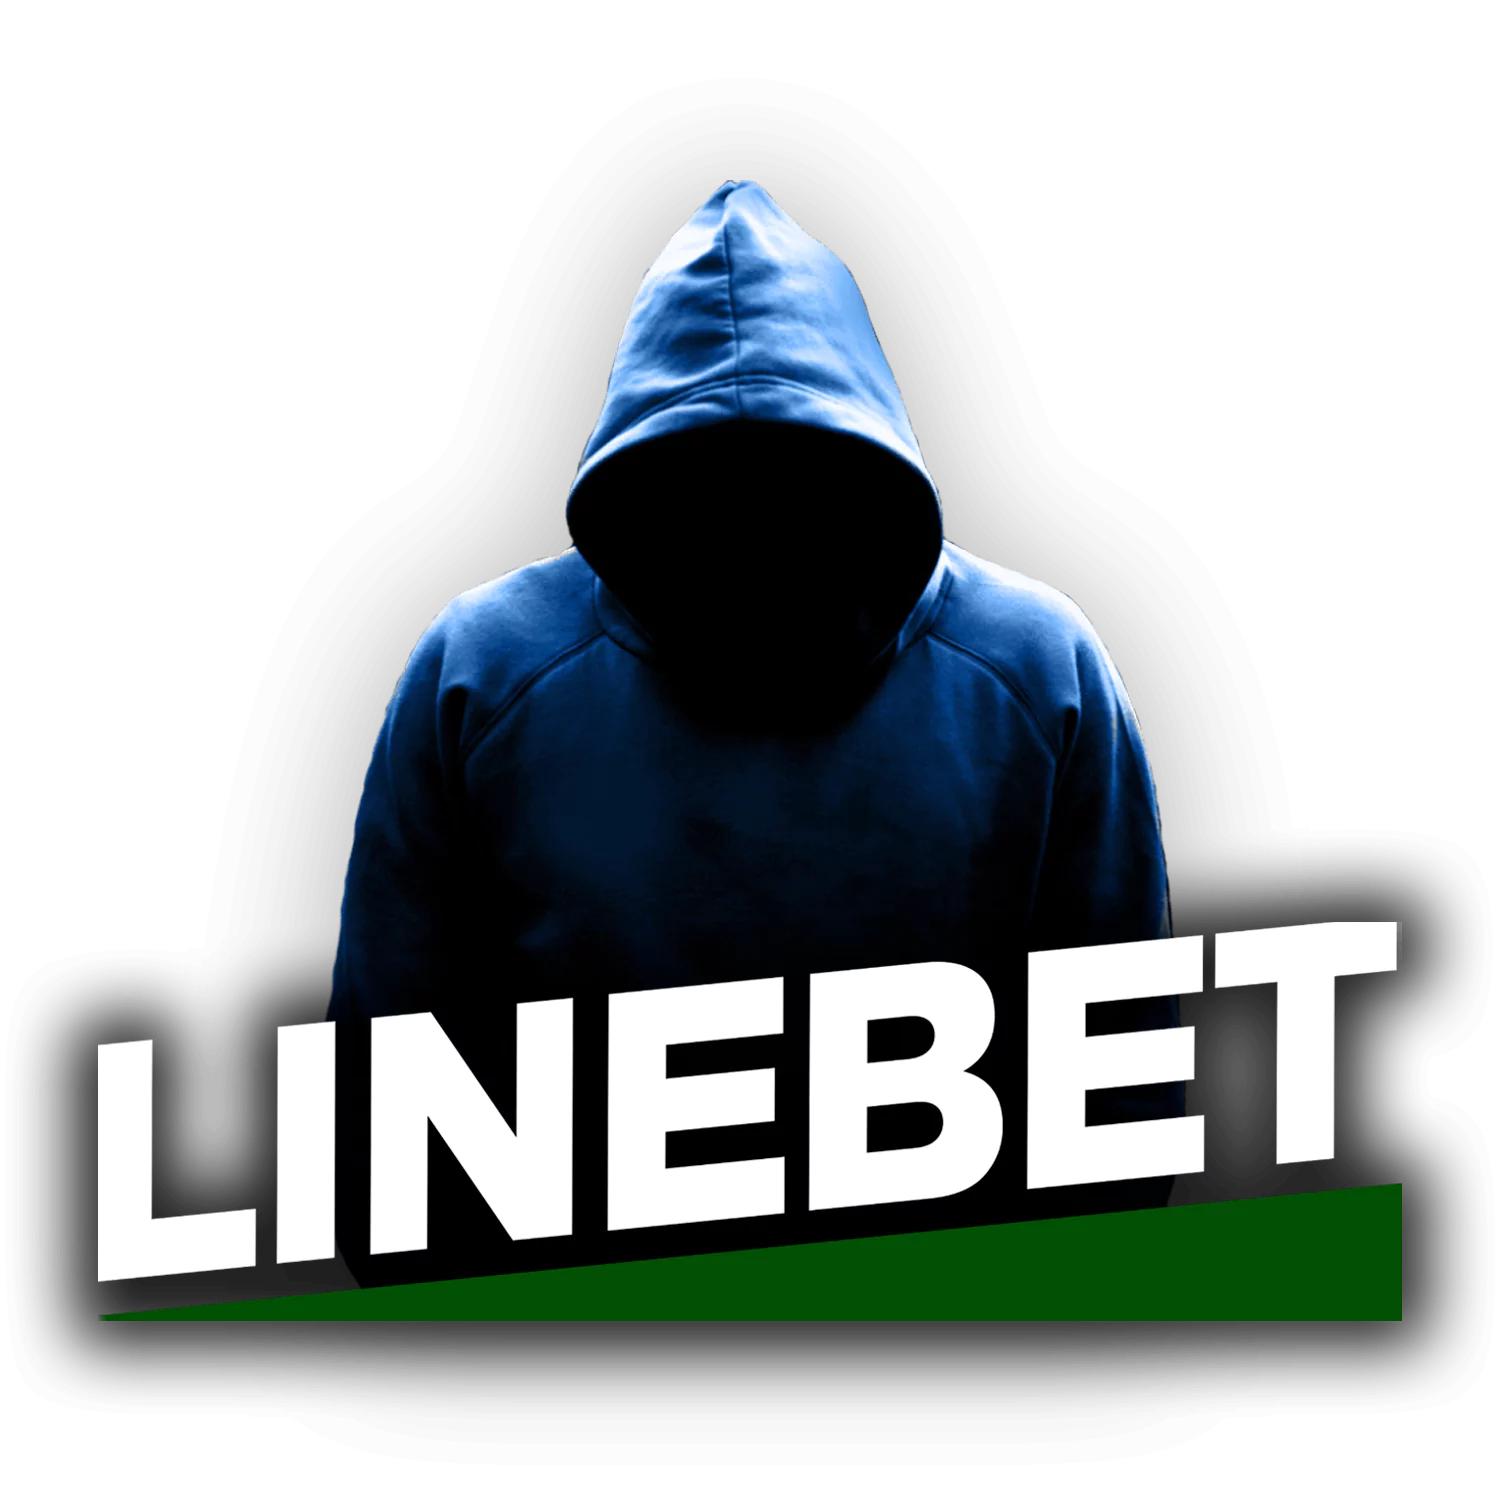 Linebet is strictly monitoring for fraud.